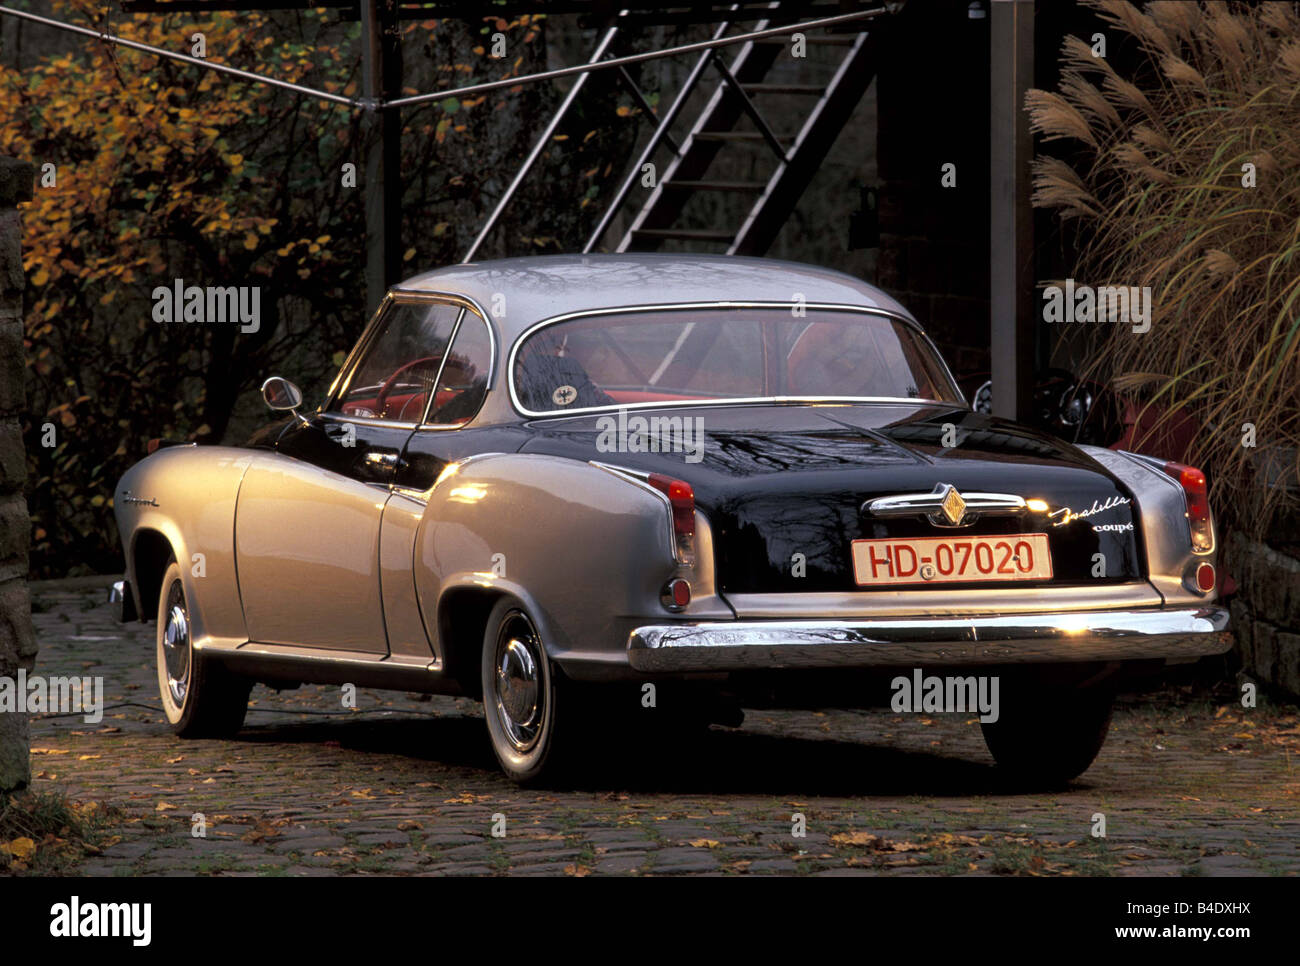 Car, Borgward Isabella Coupe/coupe, Vintage approx., model year 1958, silver-black, 1950s, sixties, FGUJ, standing, upholding, d Stock Photo